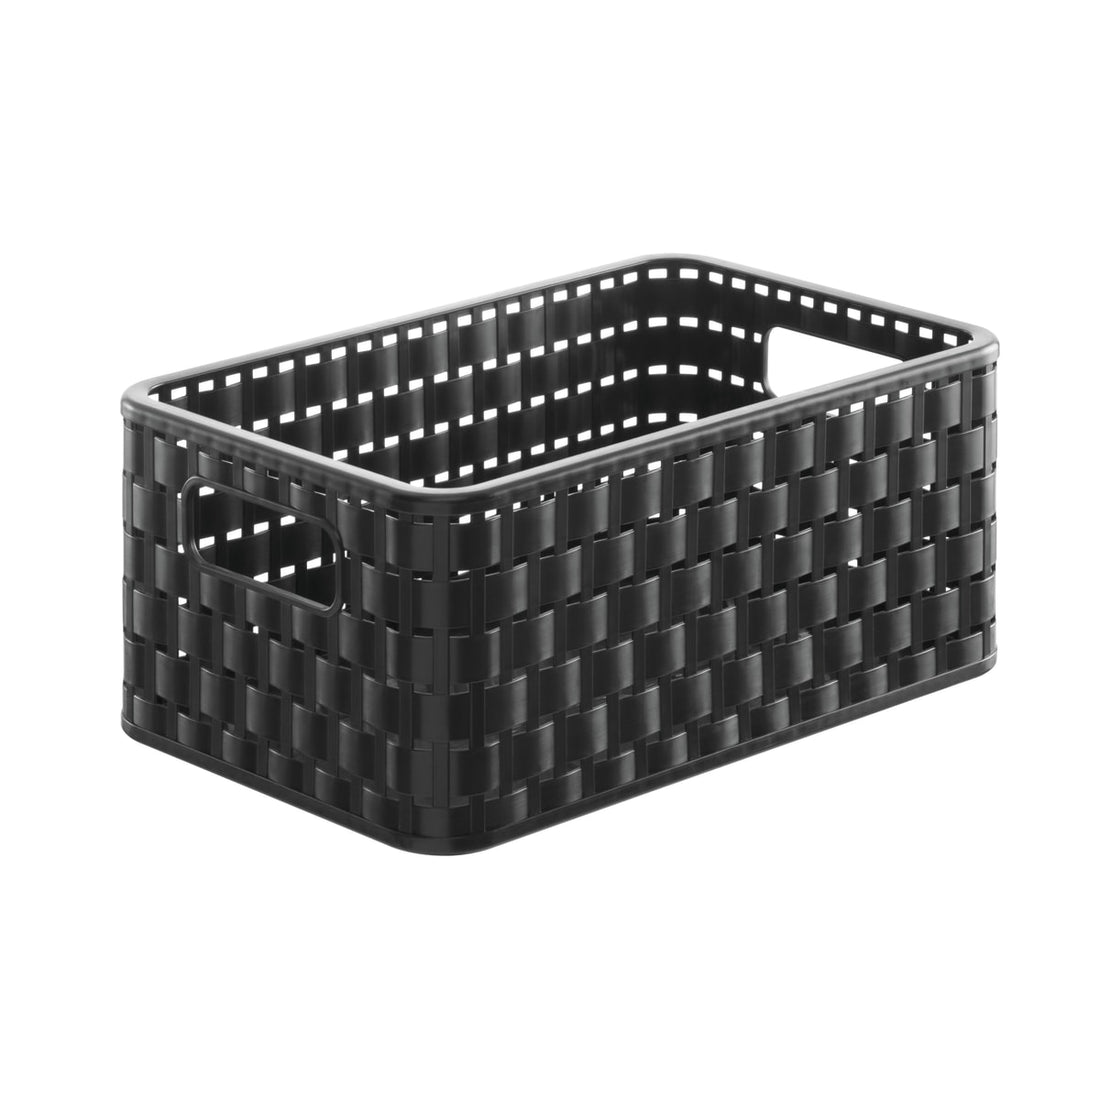 COUNTRY BASKET A5 28X18,5X12,6 CM ANTHRACITE